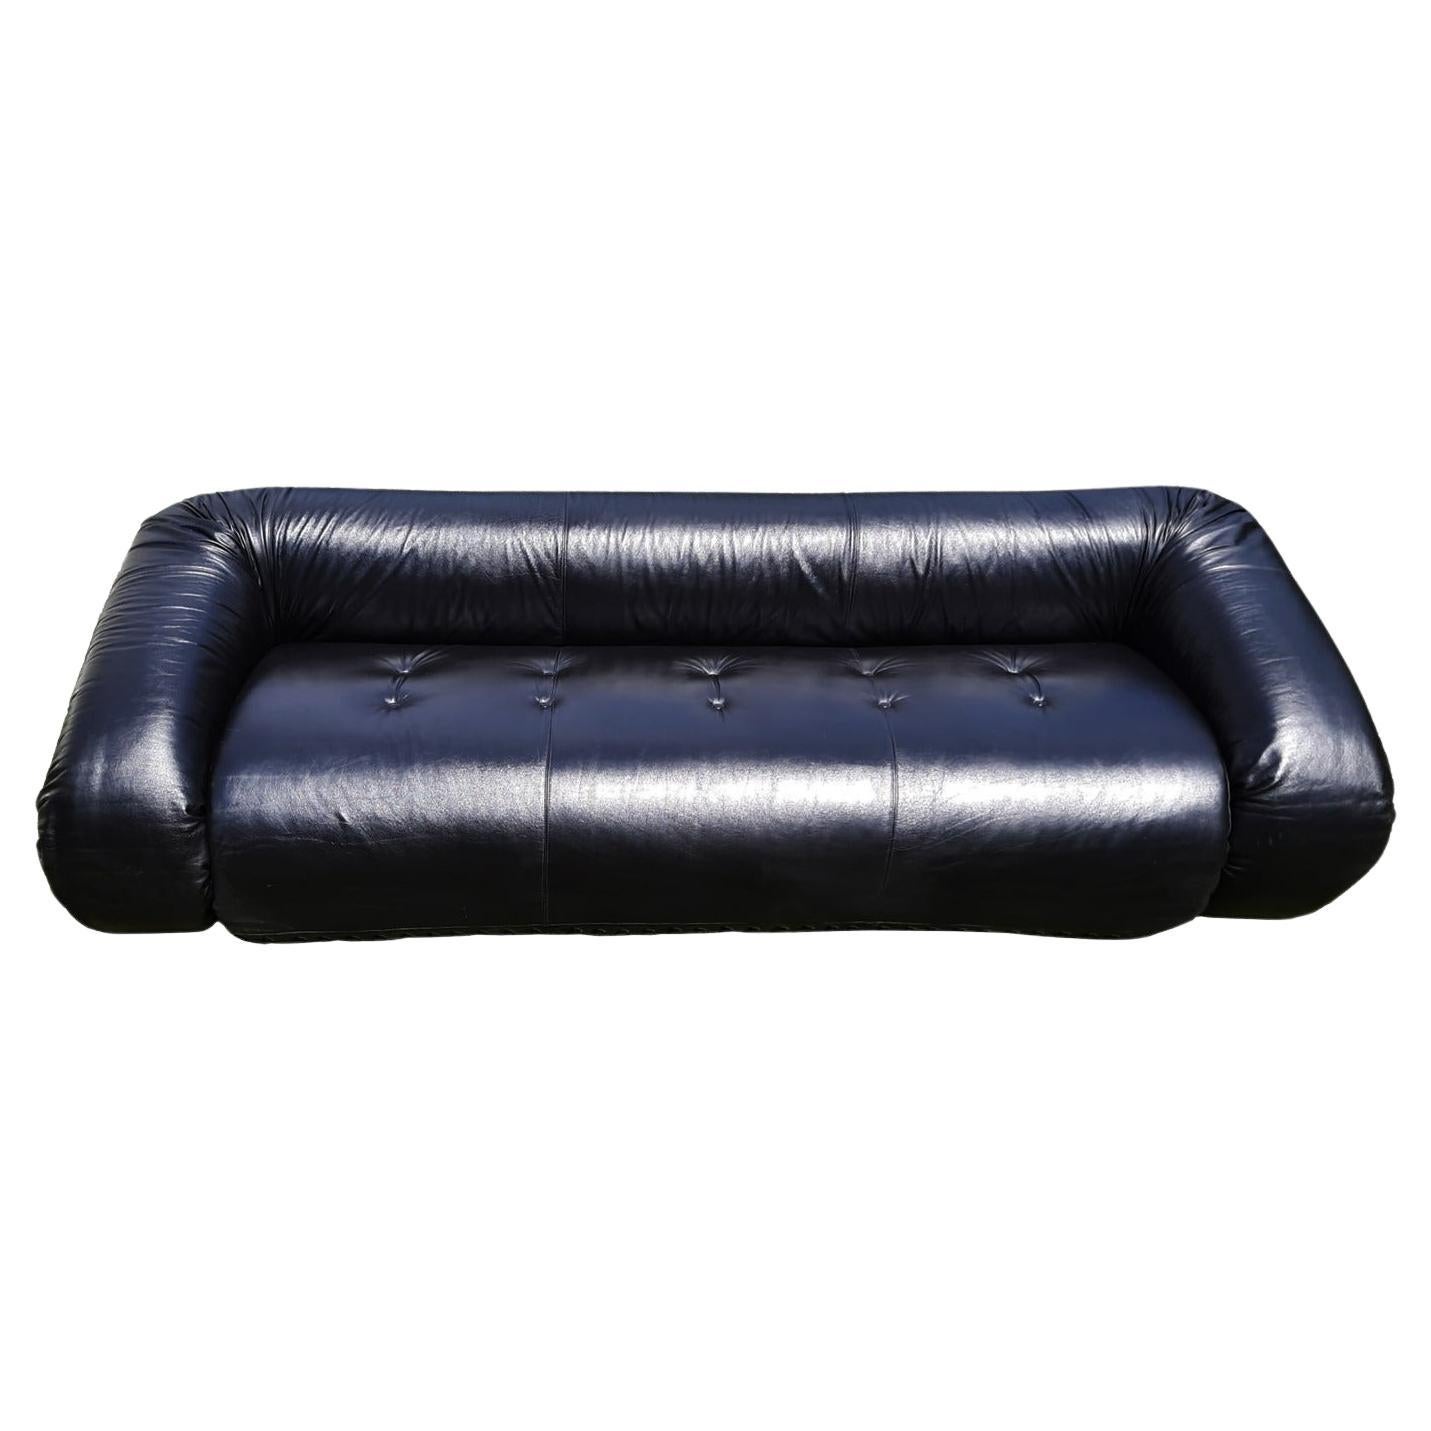 Why was a couch called a davenport?